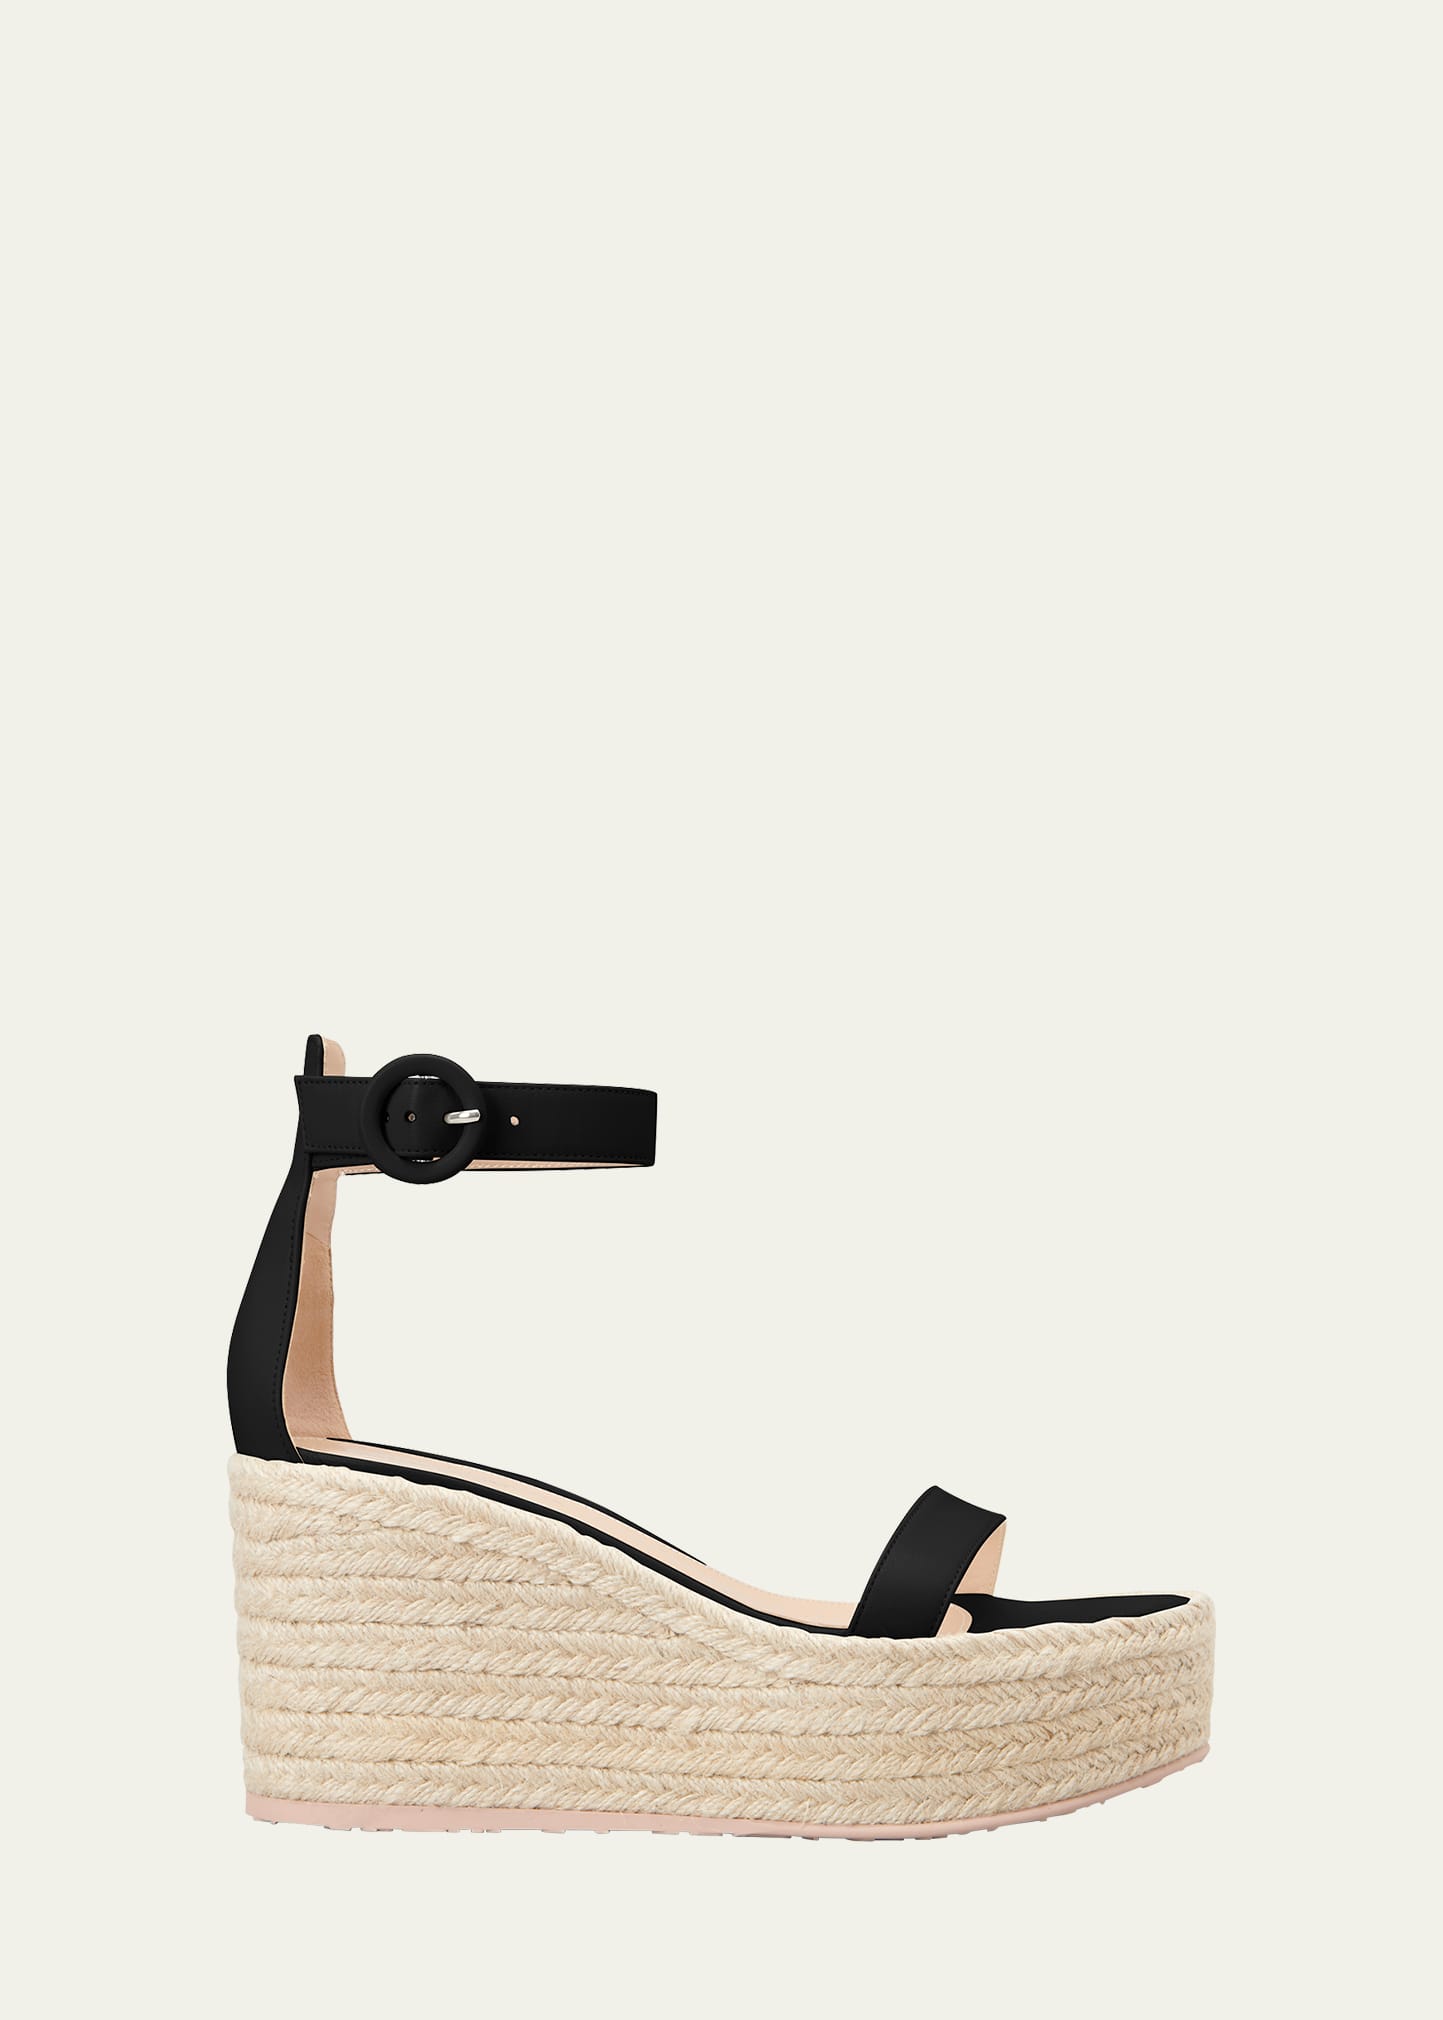 GIANVITO ROSSI SUEDE ANKLE-STRAP WEDGE ESPADRILLE SANDALS